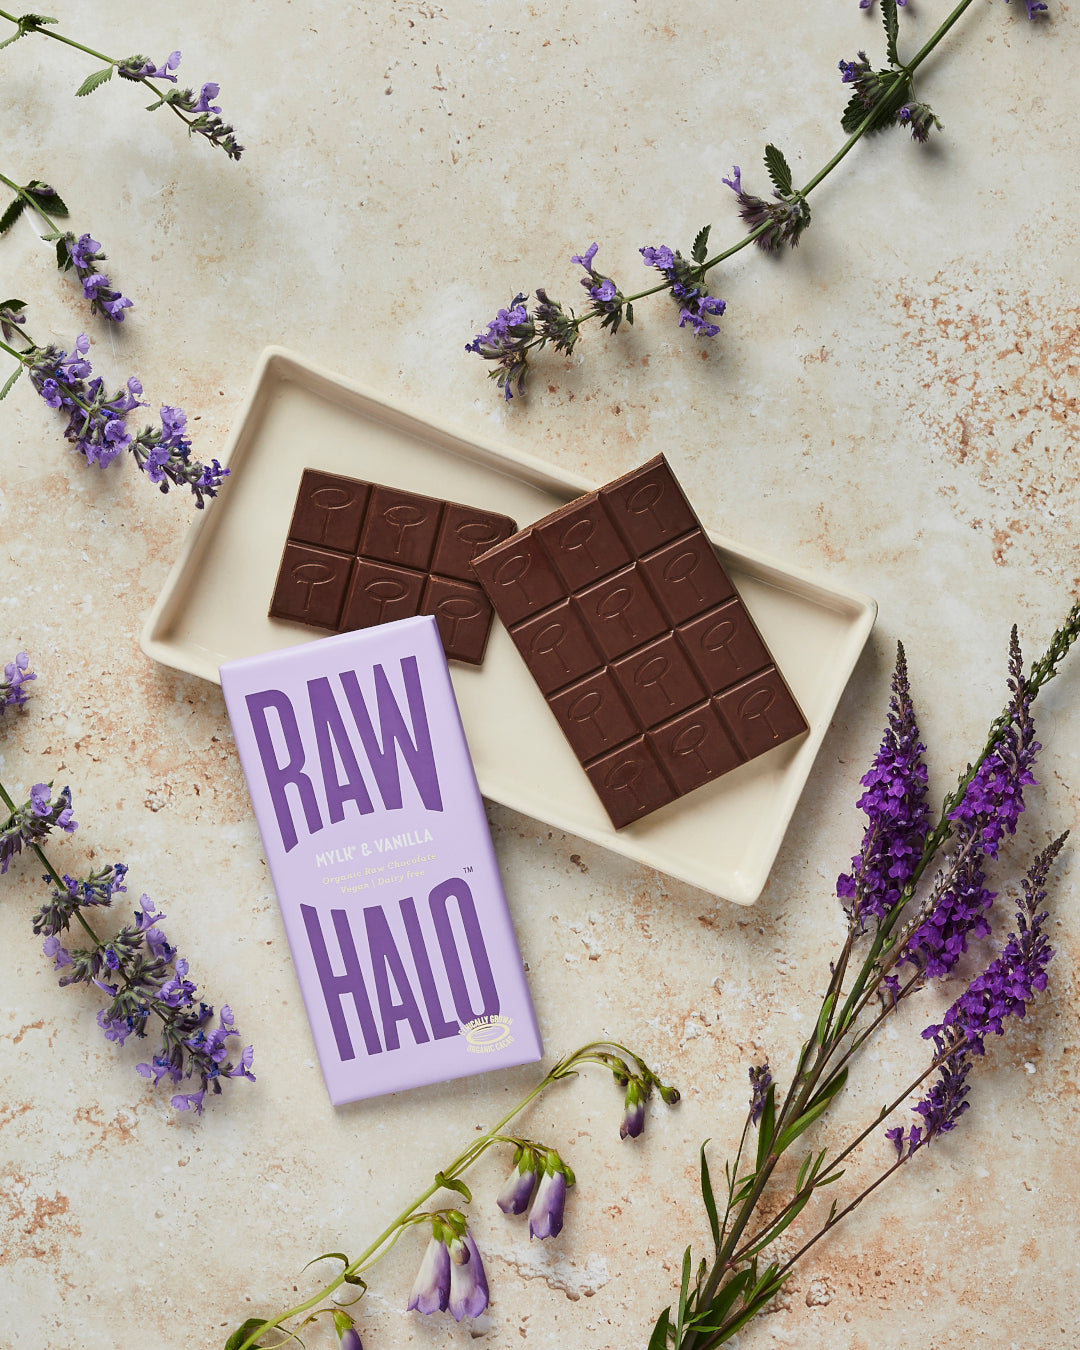 Raw Halo Organic Vegan Chocolate in Discovery Gift Collection